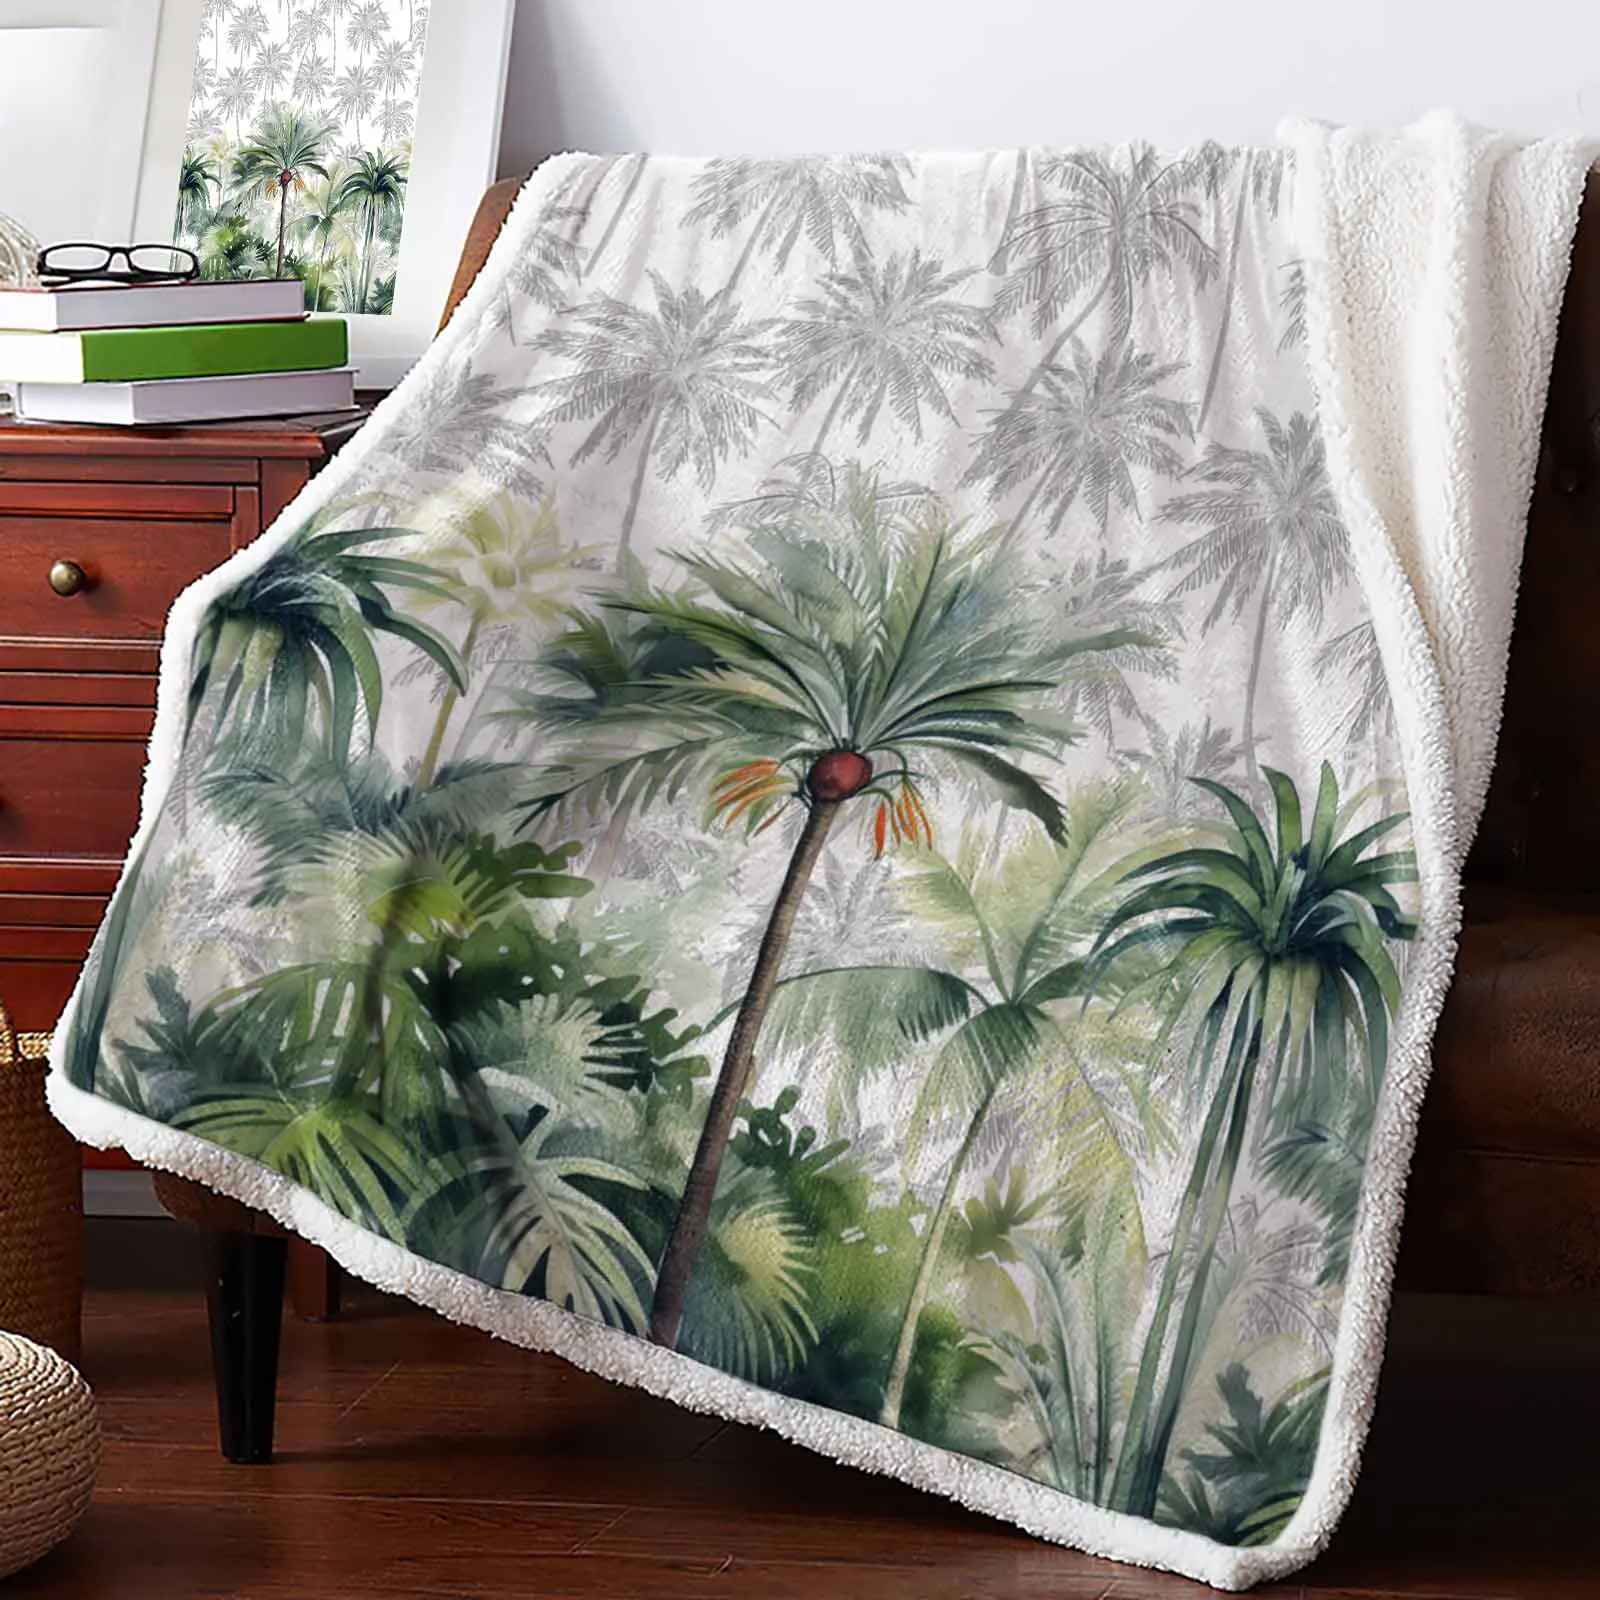 

Summer Tropical Palm Trees Cashmere Blanket Warm Winter Soft Throw Blankets for Beds Sofa Wool Blanket Bedspread